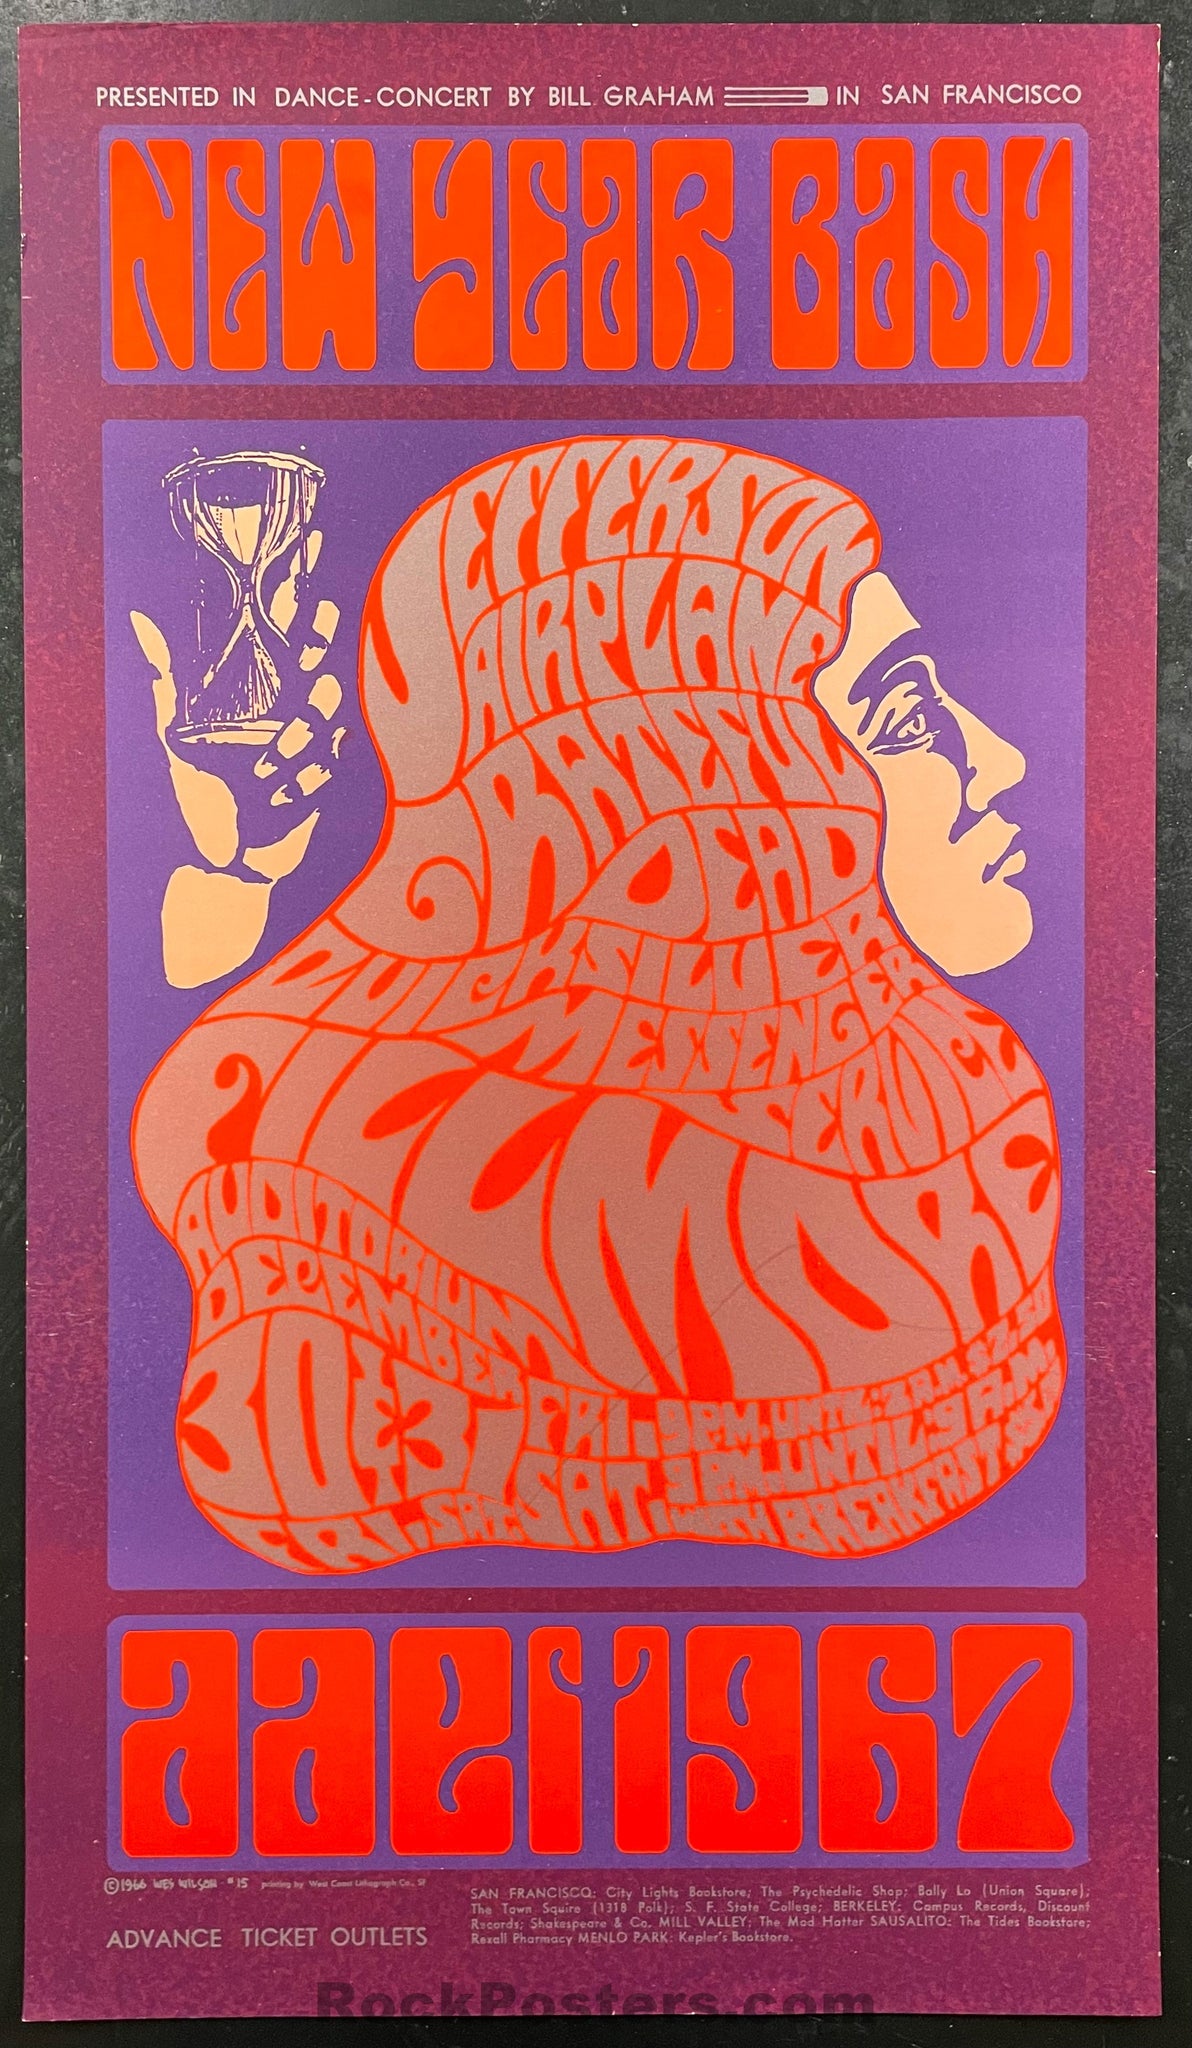 AUCTION - BG-37 - Grateful Dead - New Years - 1966/67 Poster - Fillmor – SF  Rock Posters & Collectibles